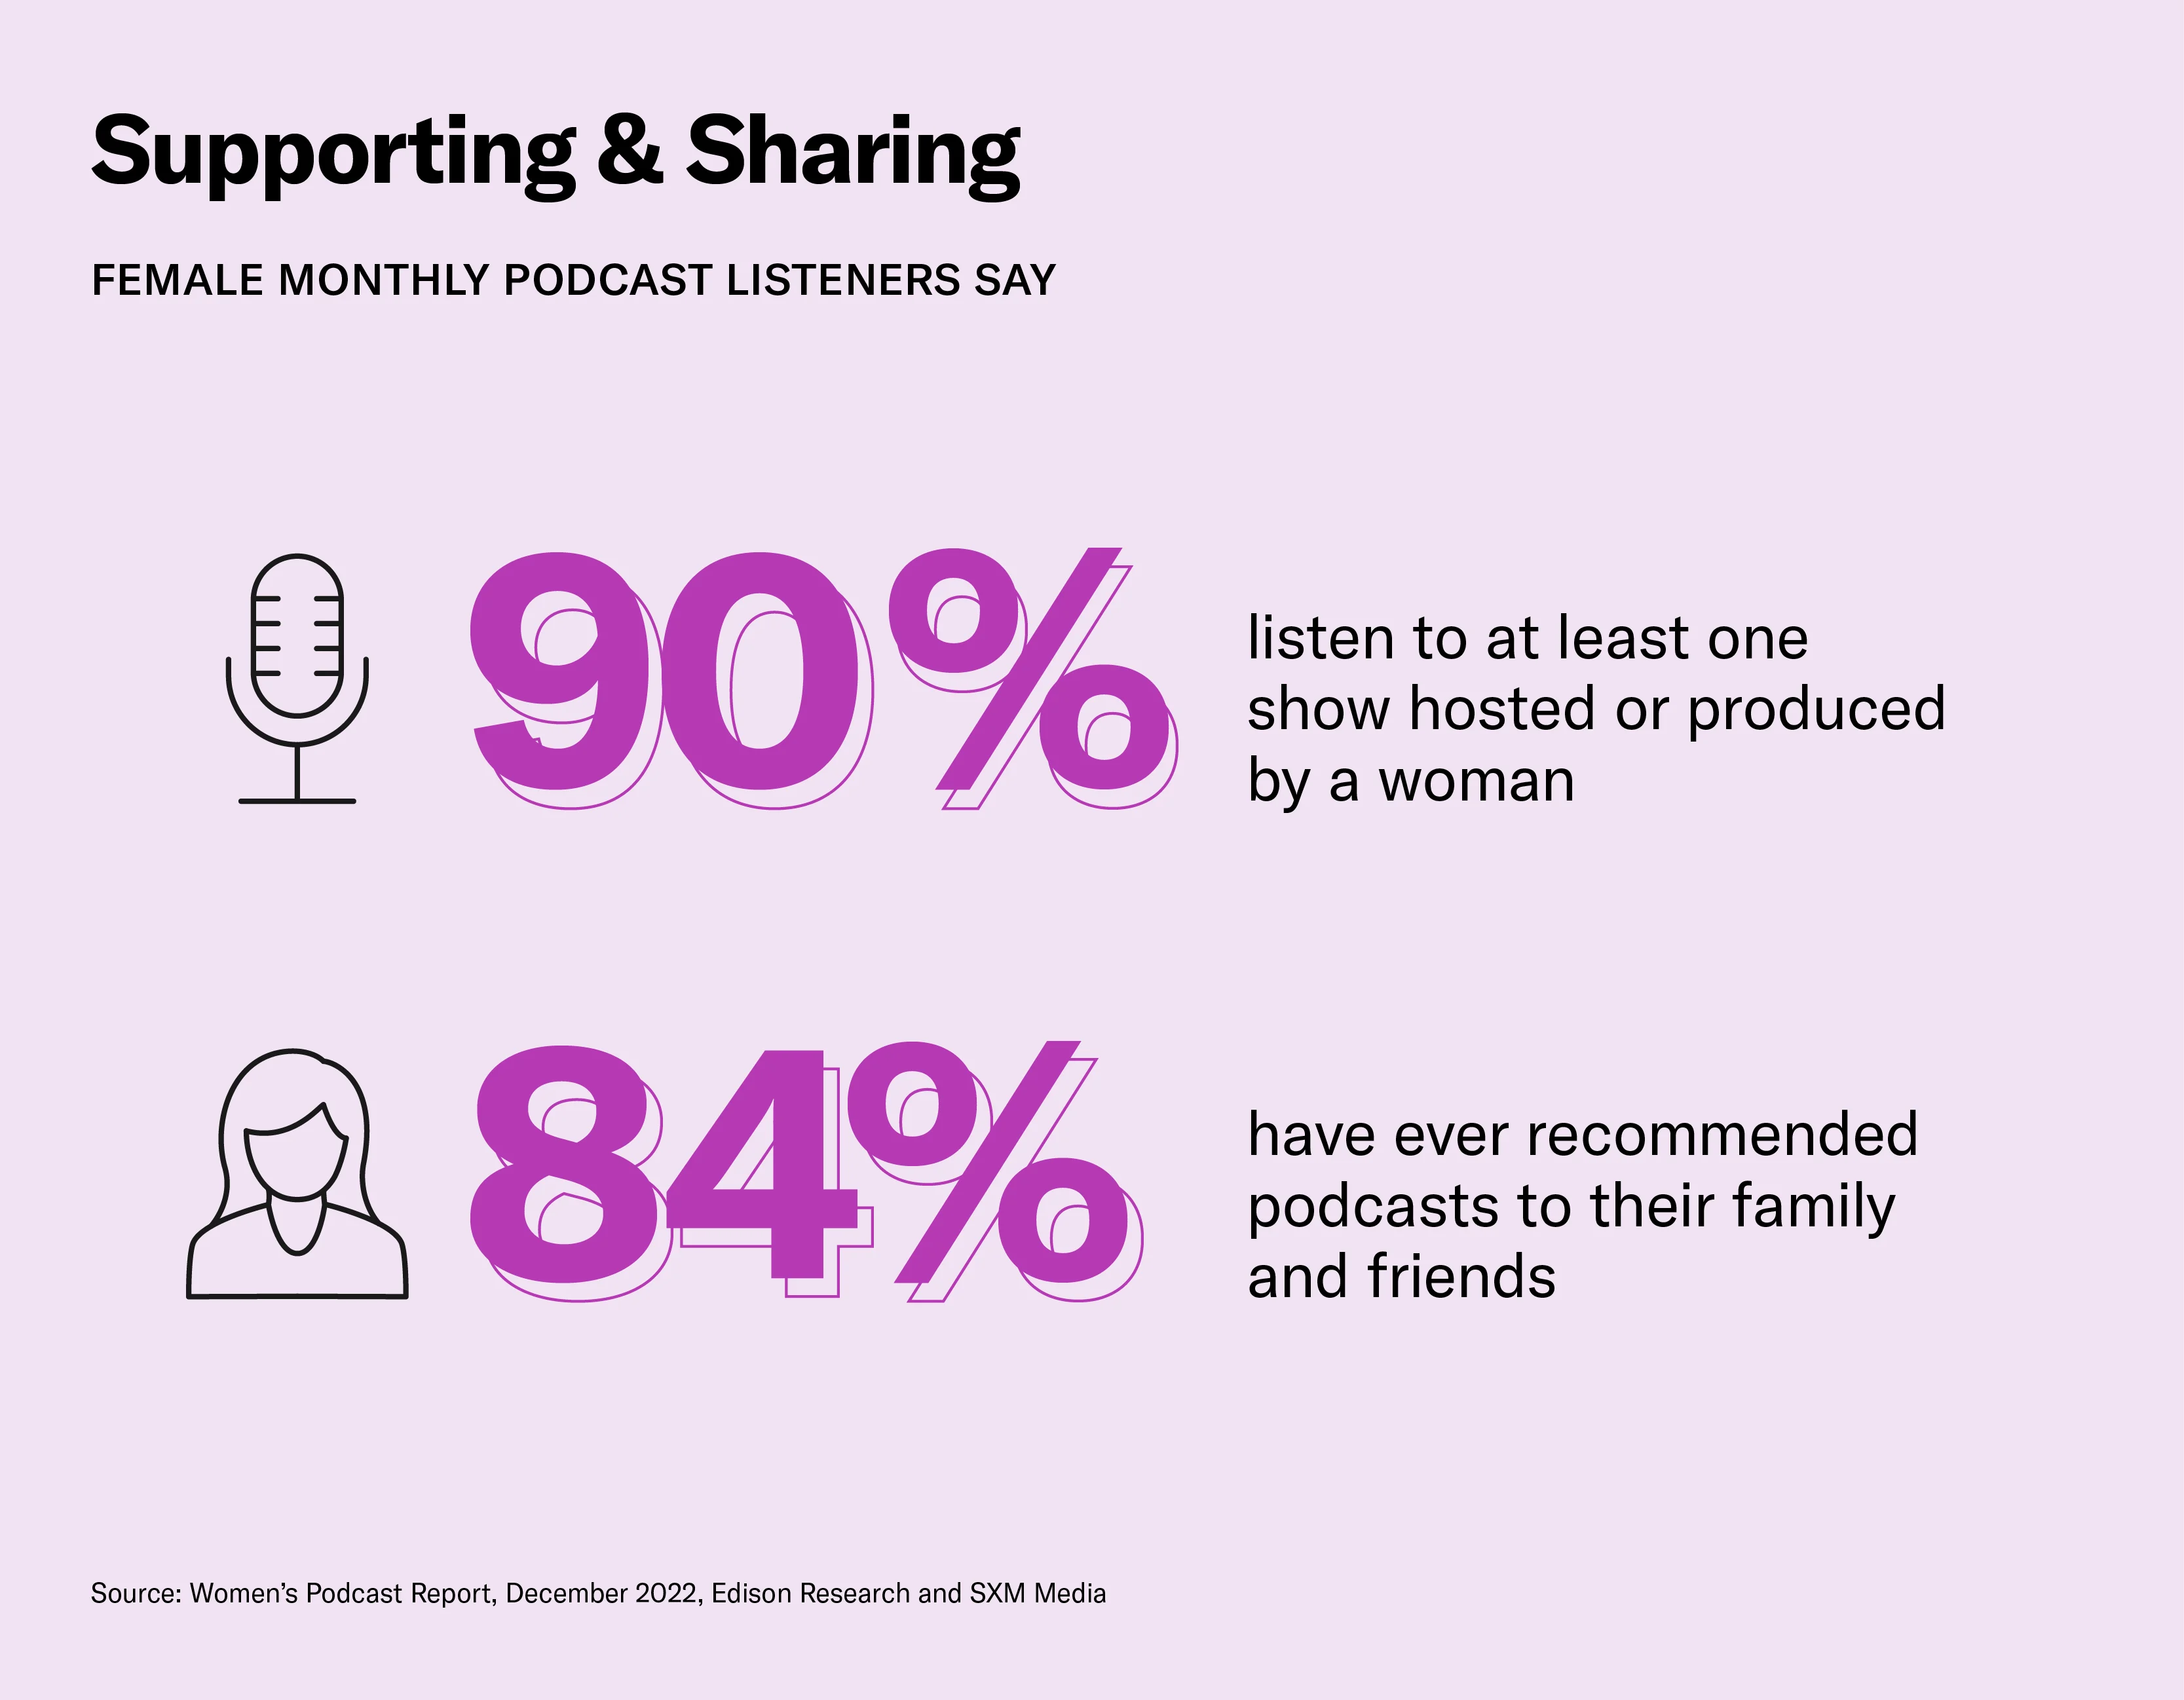 Female podcast listeners support women in podcasting